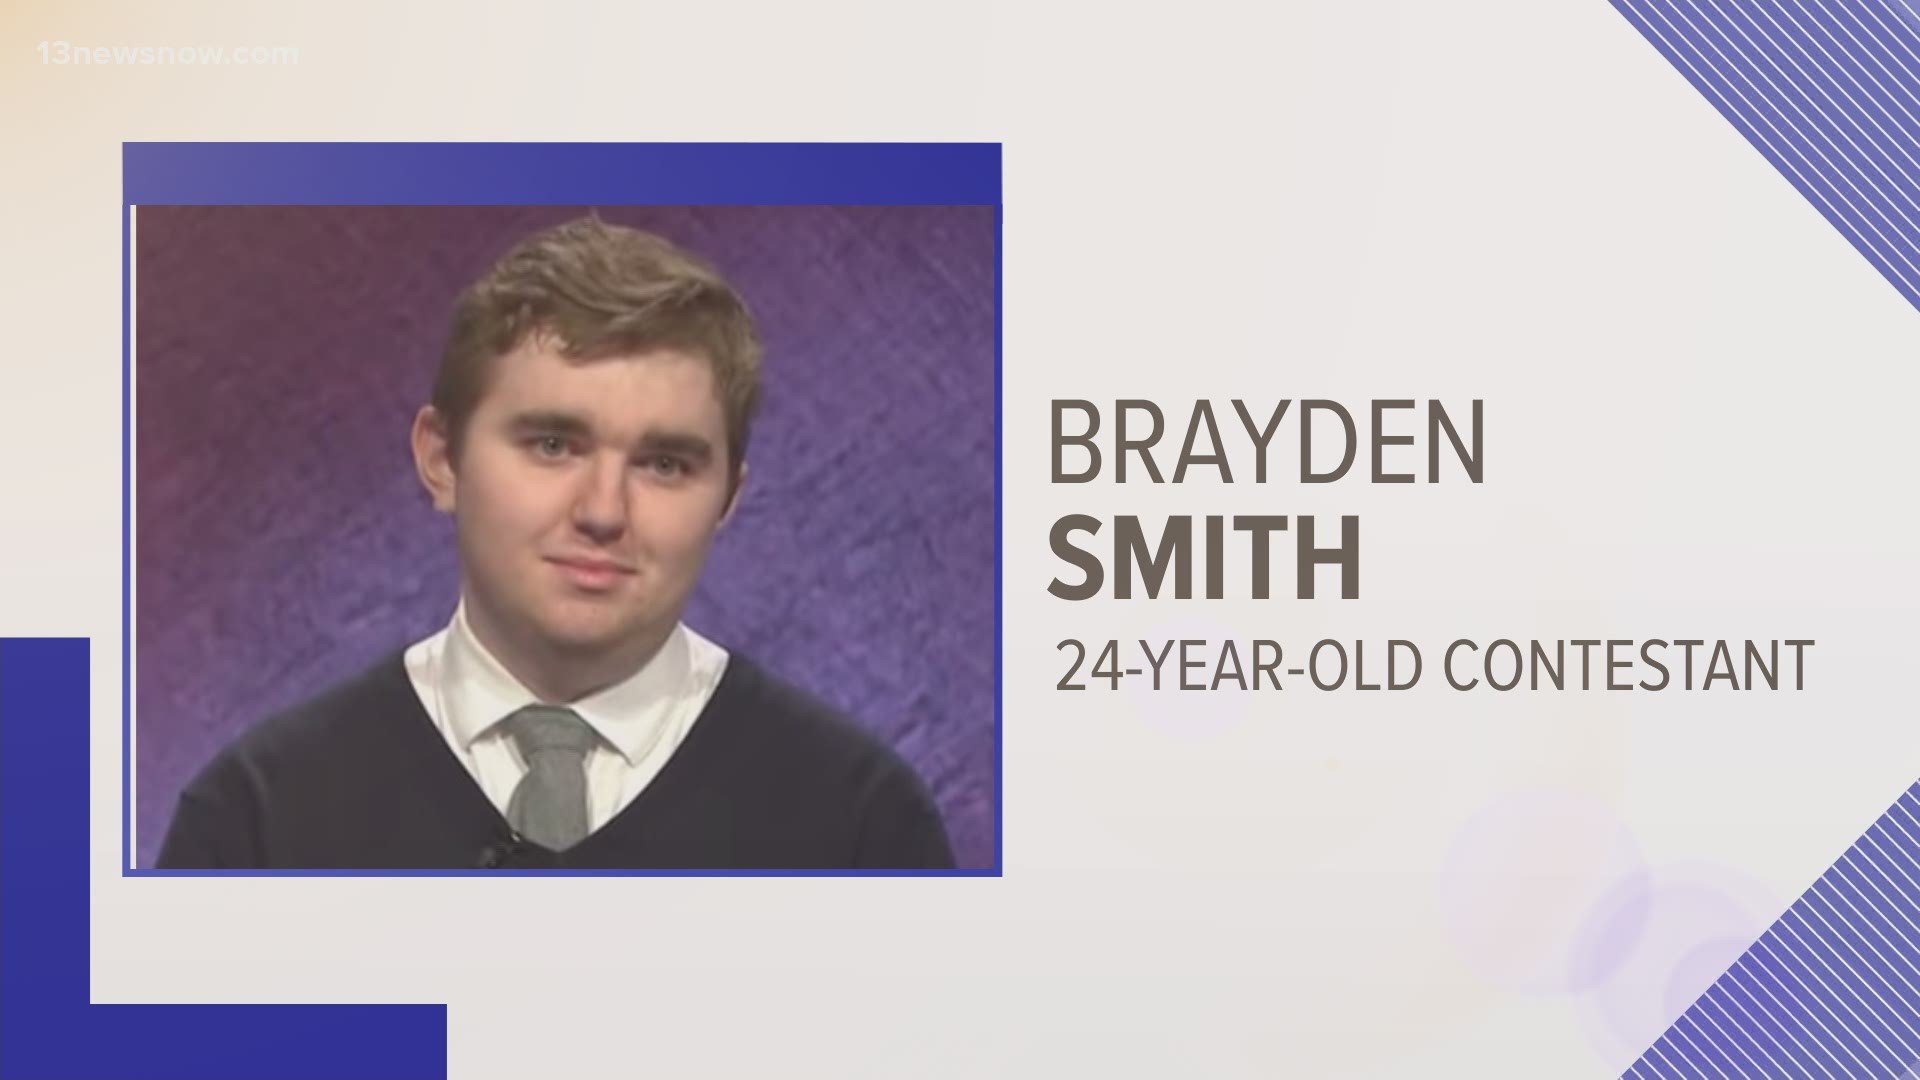 Brayden Smith, one of Alex Trebek's final 'Jeopardy!' contestants, died unexpectedly last Friday.